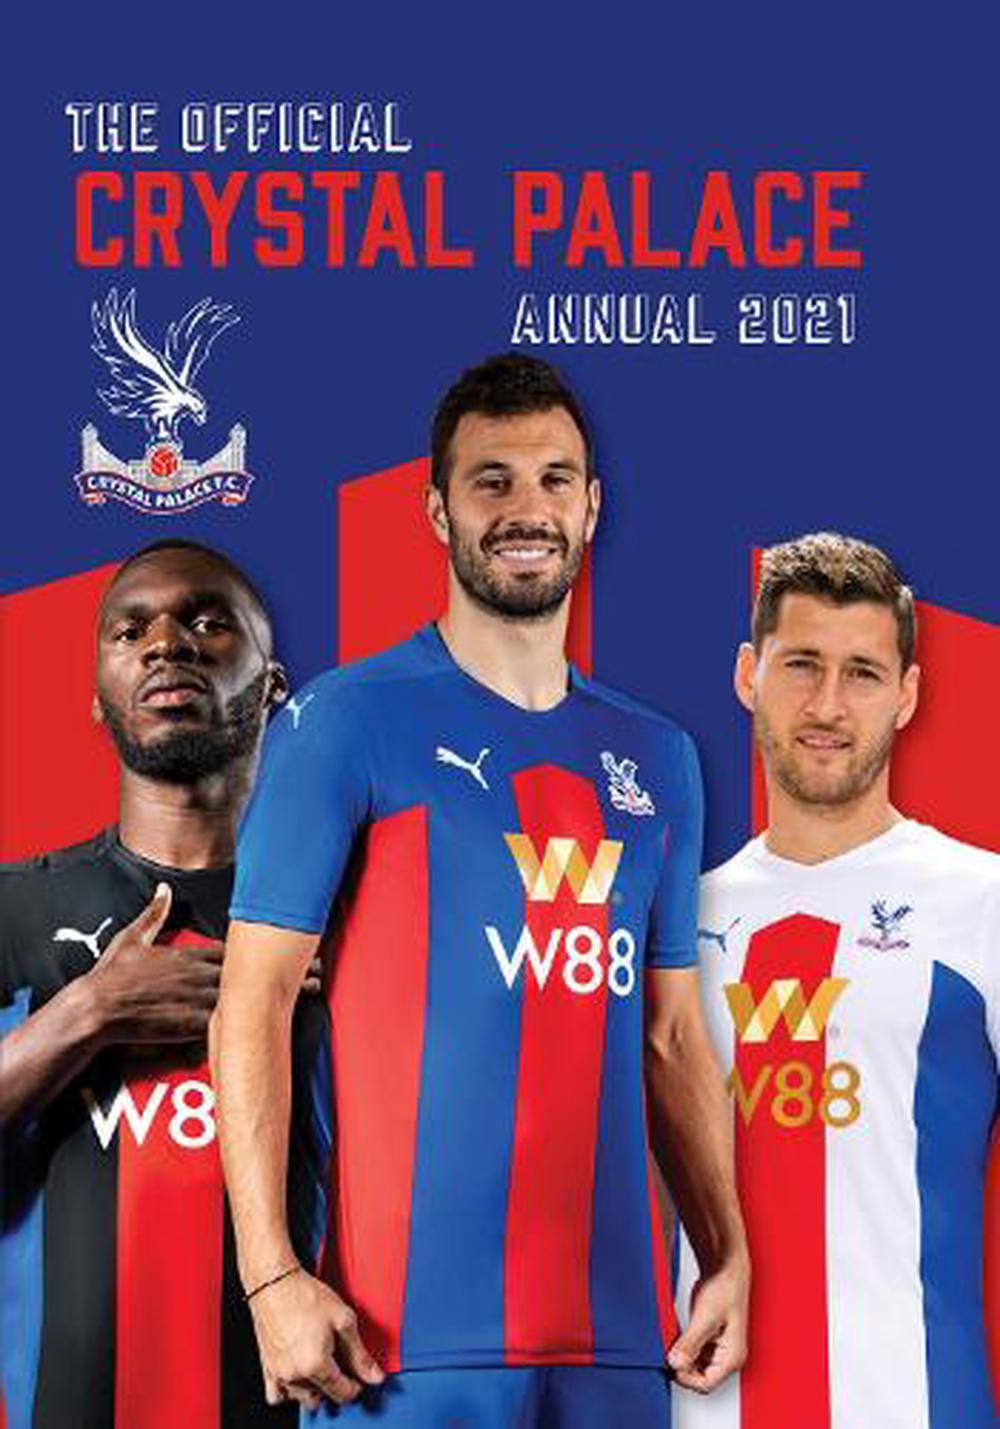 The Official Crystal Palace Annual 2021 by Andrew McSteen (English